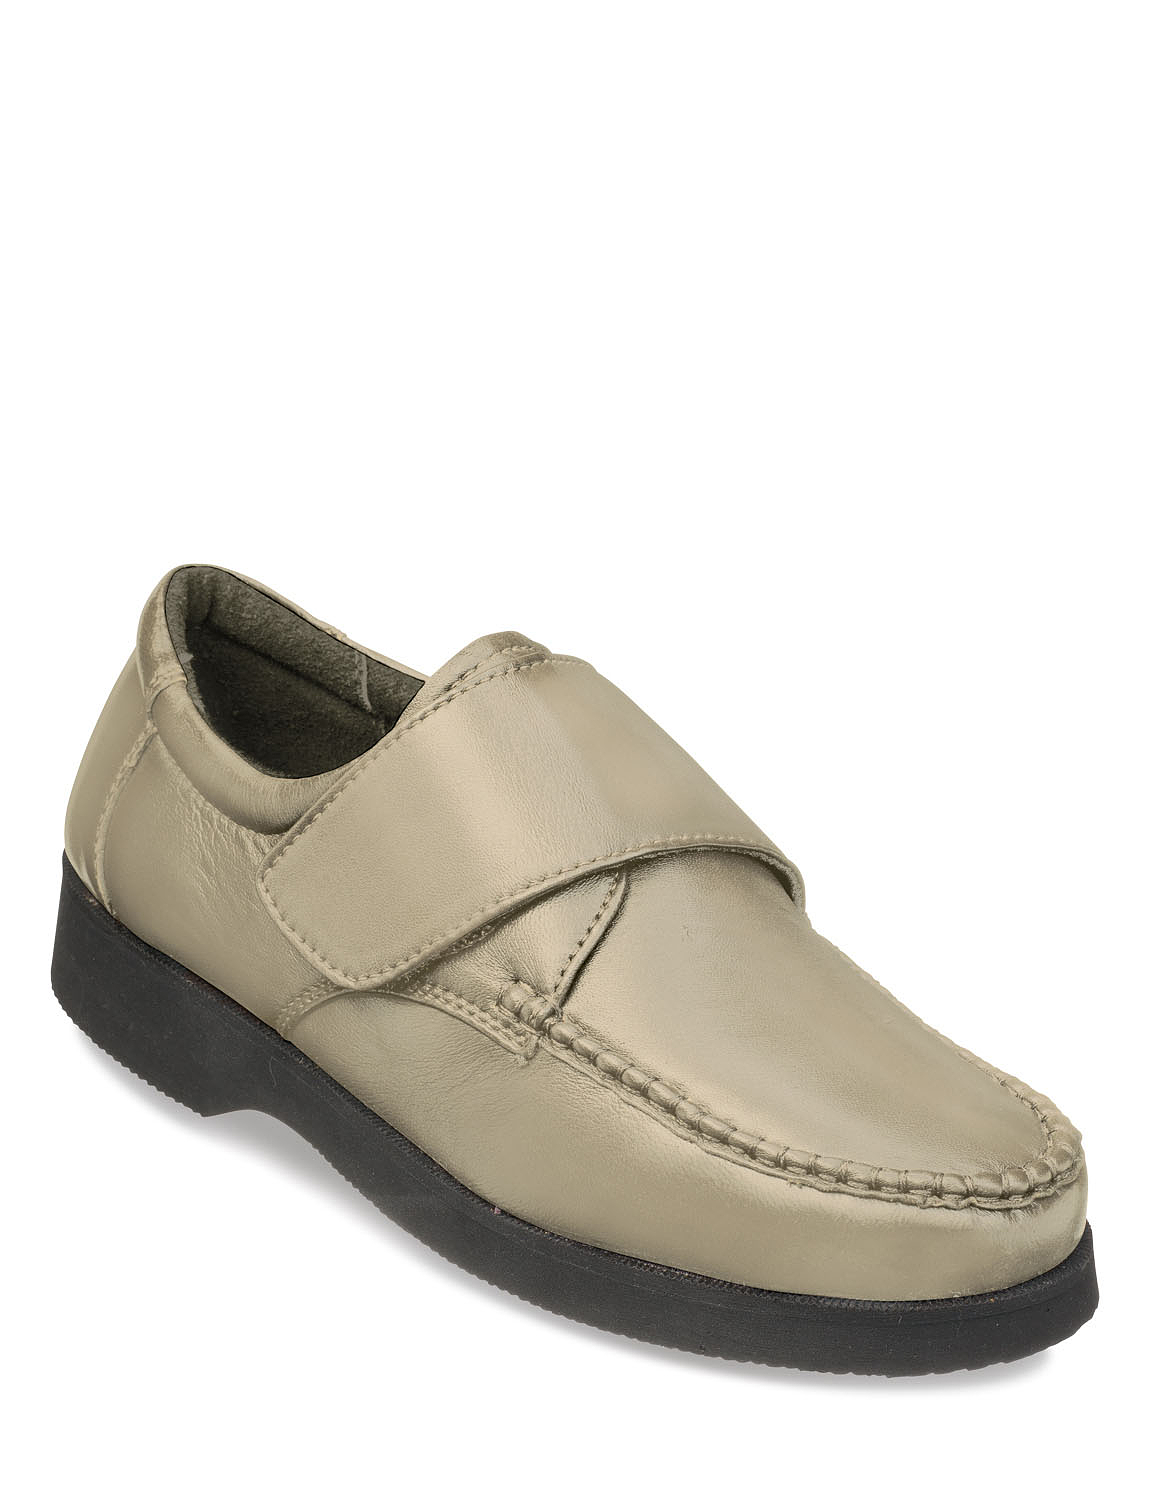 Leather Wide Fit Touch Fasten Shoe | Chums